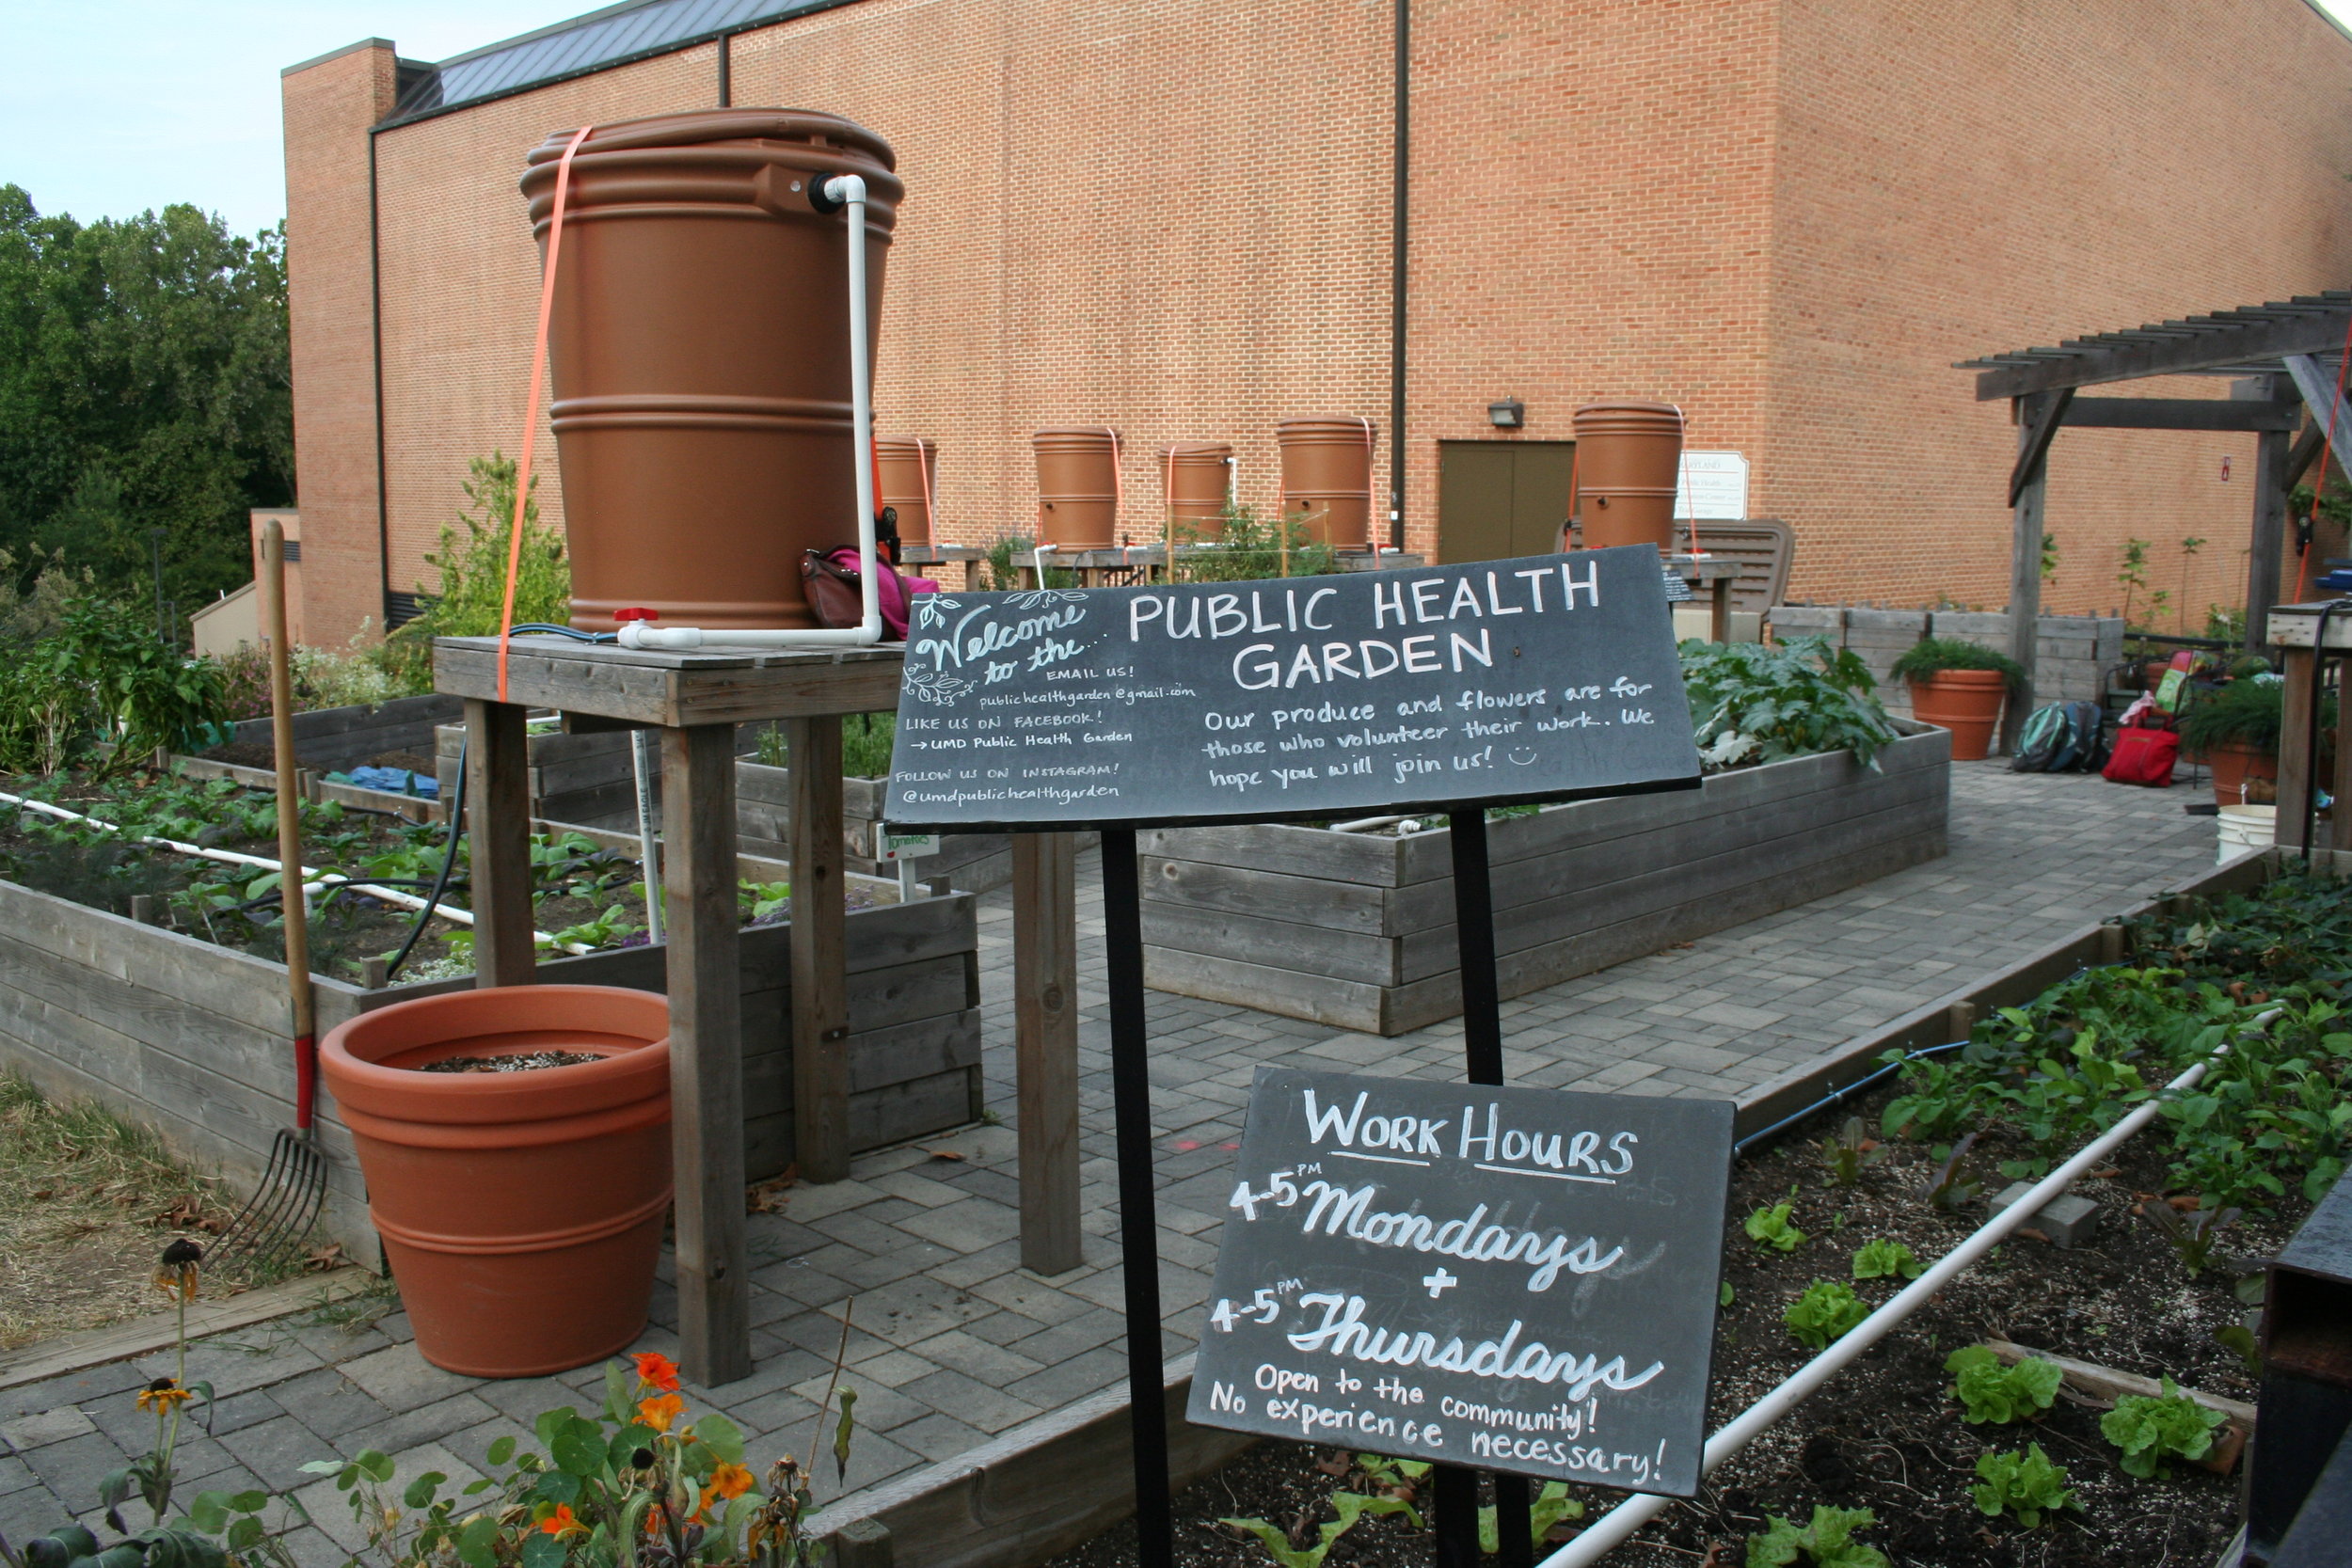  The Public Health Garden Club began at the University of Maryland, College Park in 2010 as a graduate student project. Today, it is fueled by both undergraduate and graduate students, as well as faculty, staff and local volunteers. All are welcome t